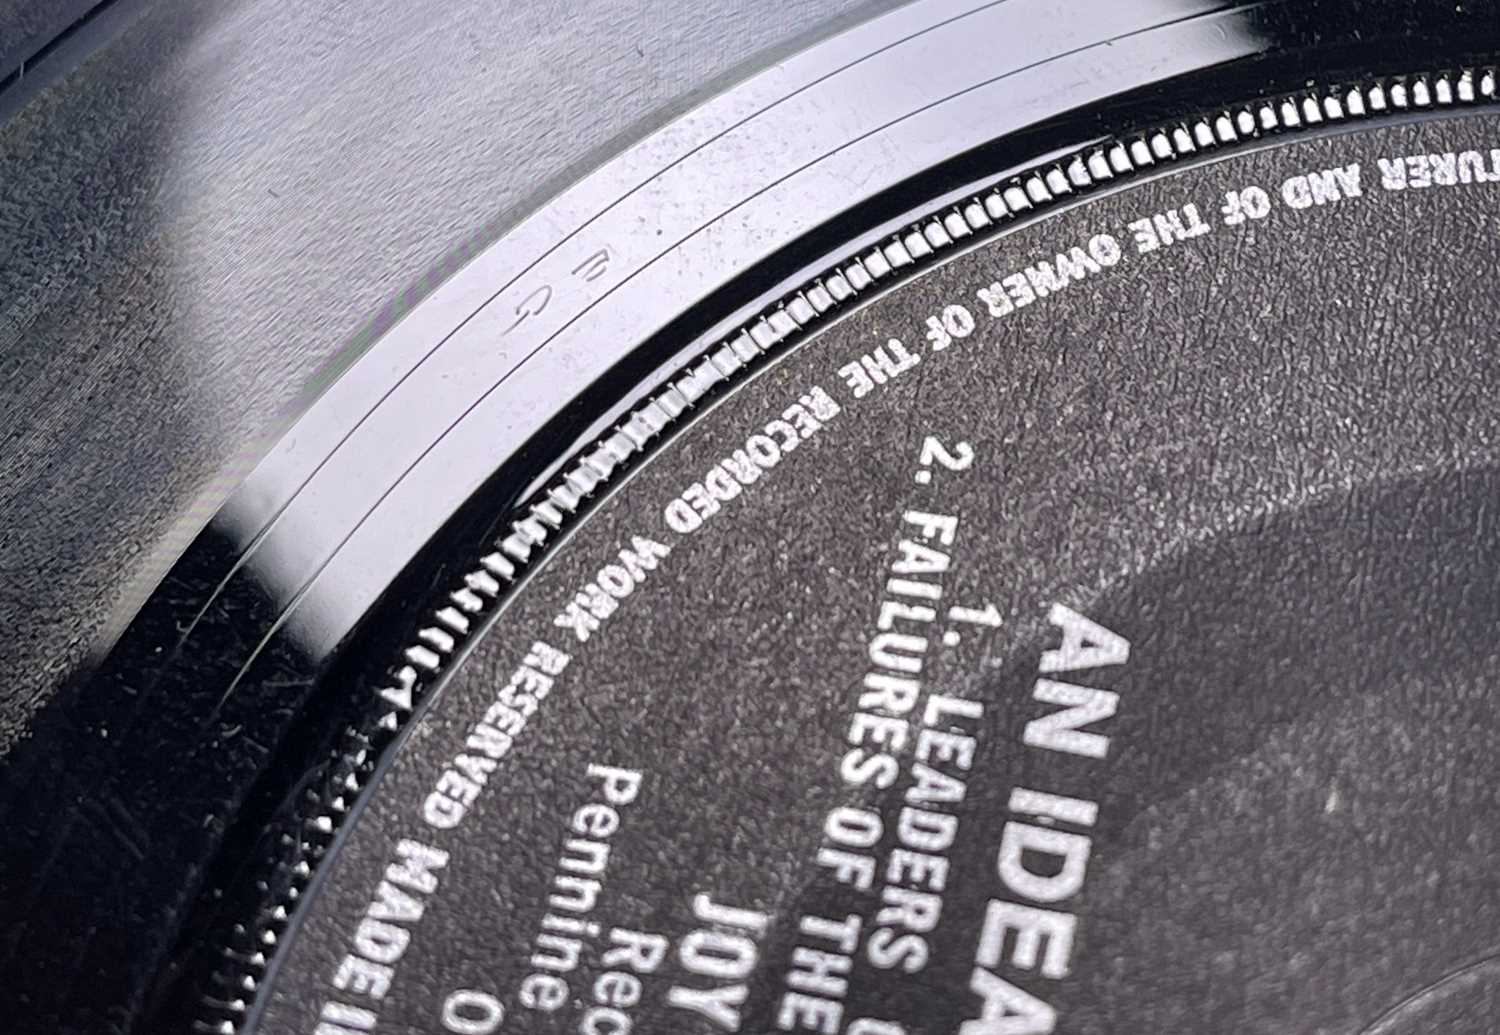 JOY DIVISION - AN IDEAL FOR LIVING 7" (ORIGINAL UK RELEASE - ENIGMA RECORDS - PSS 139) - Image 5 of 5